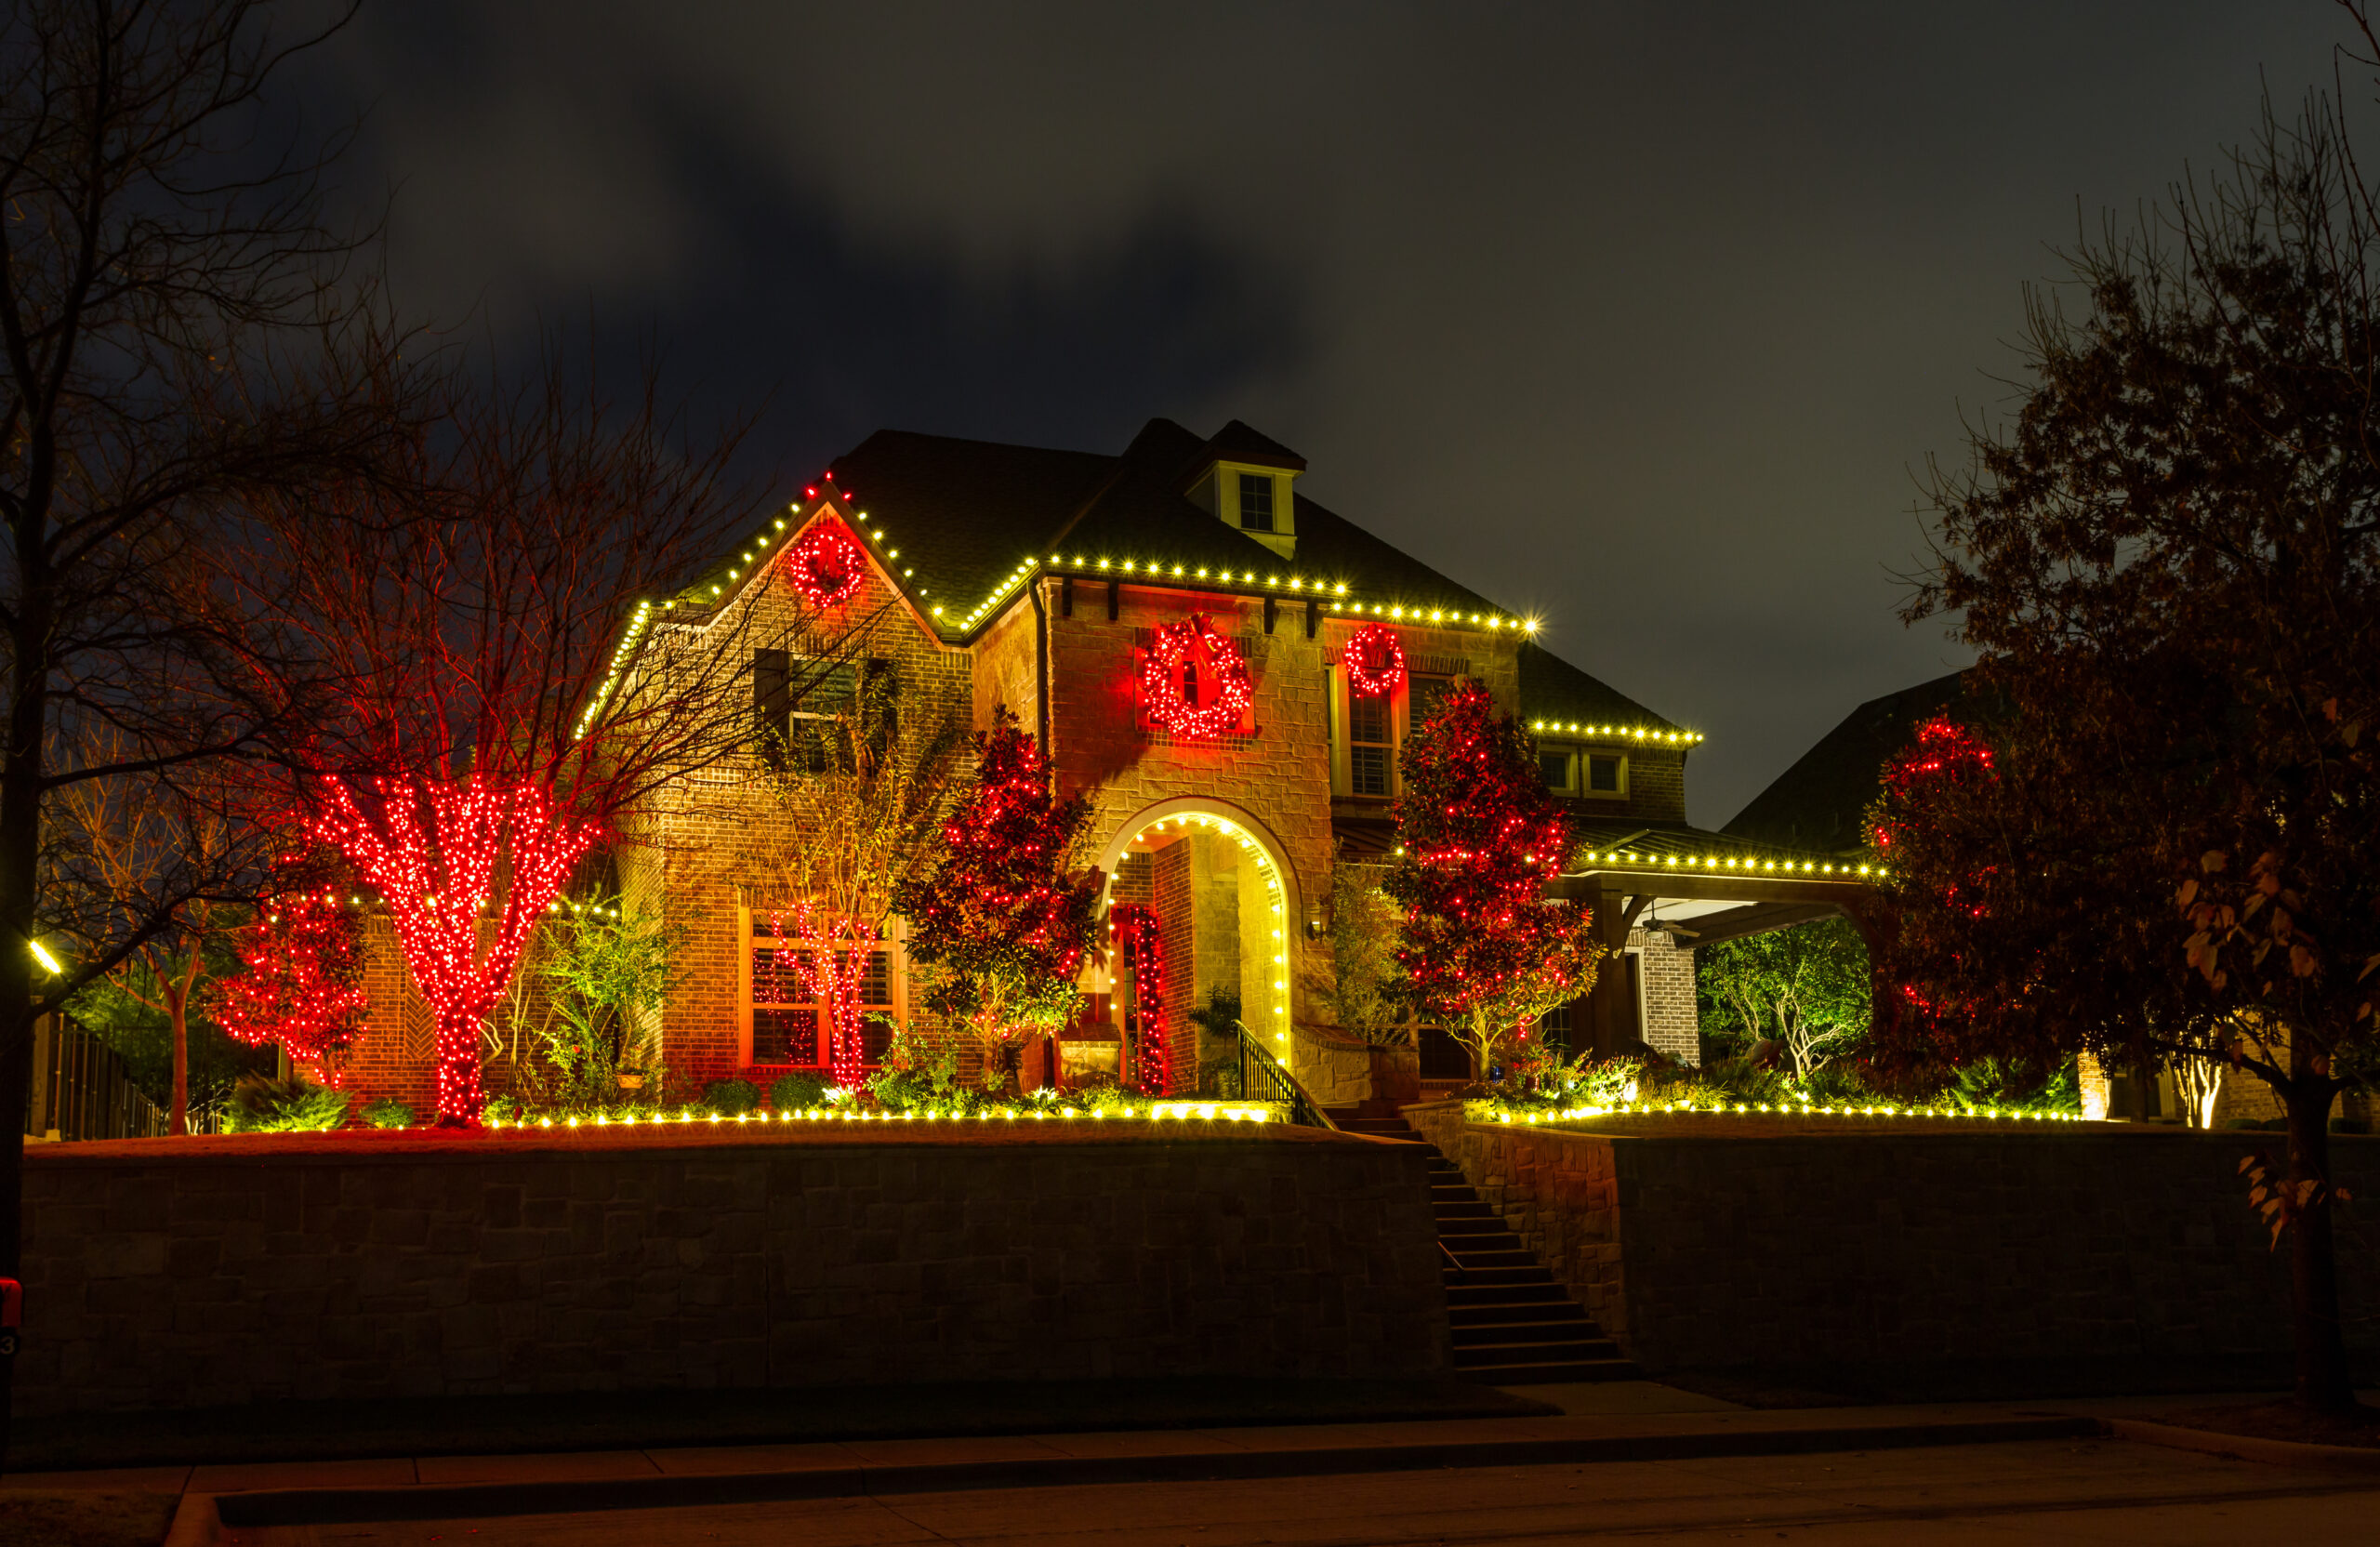 Private residence house decorated and illuminated for Christmas in Longmont, Colorado